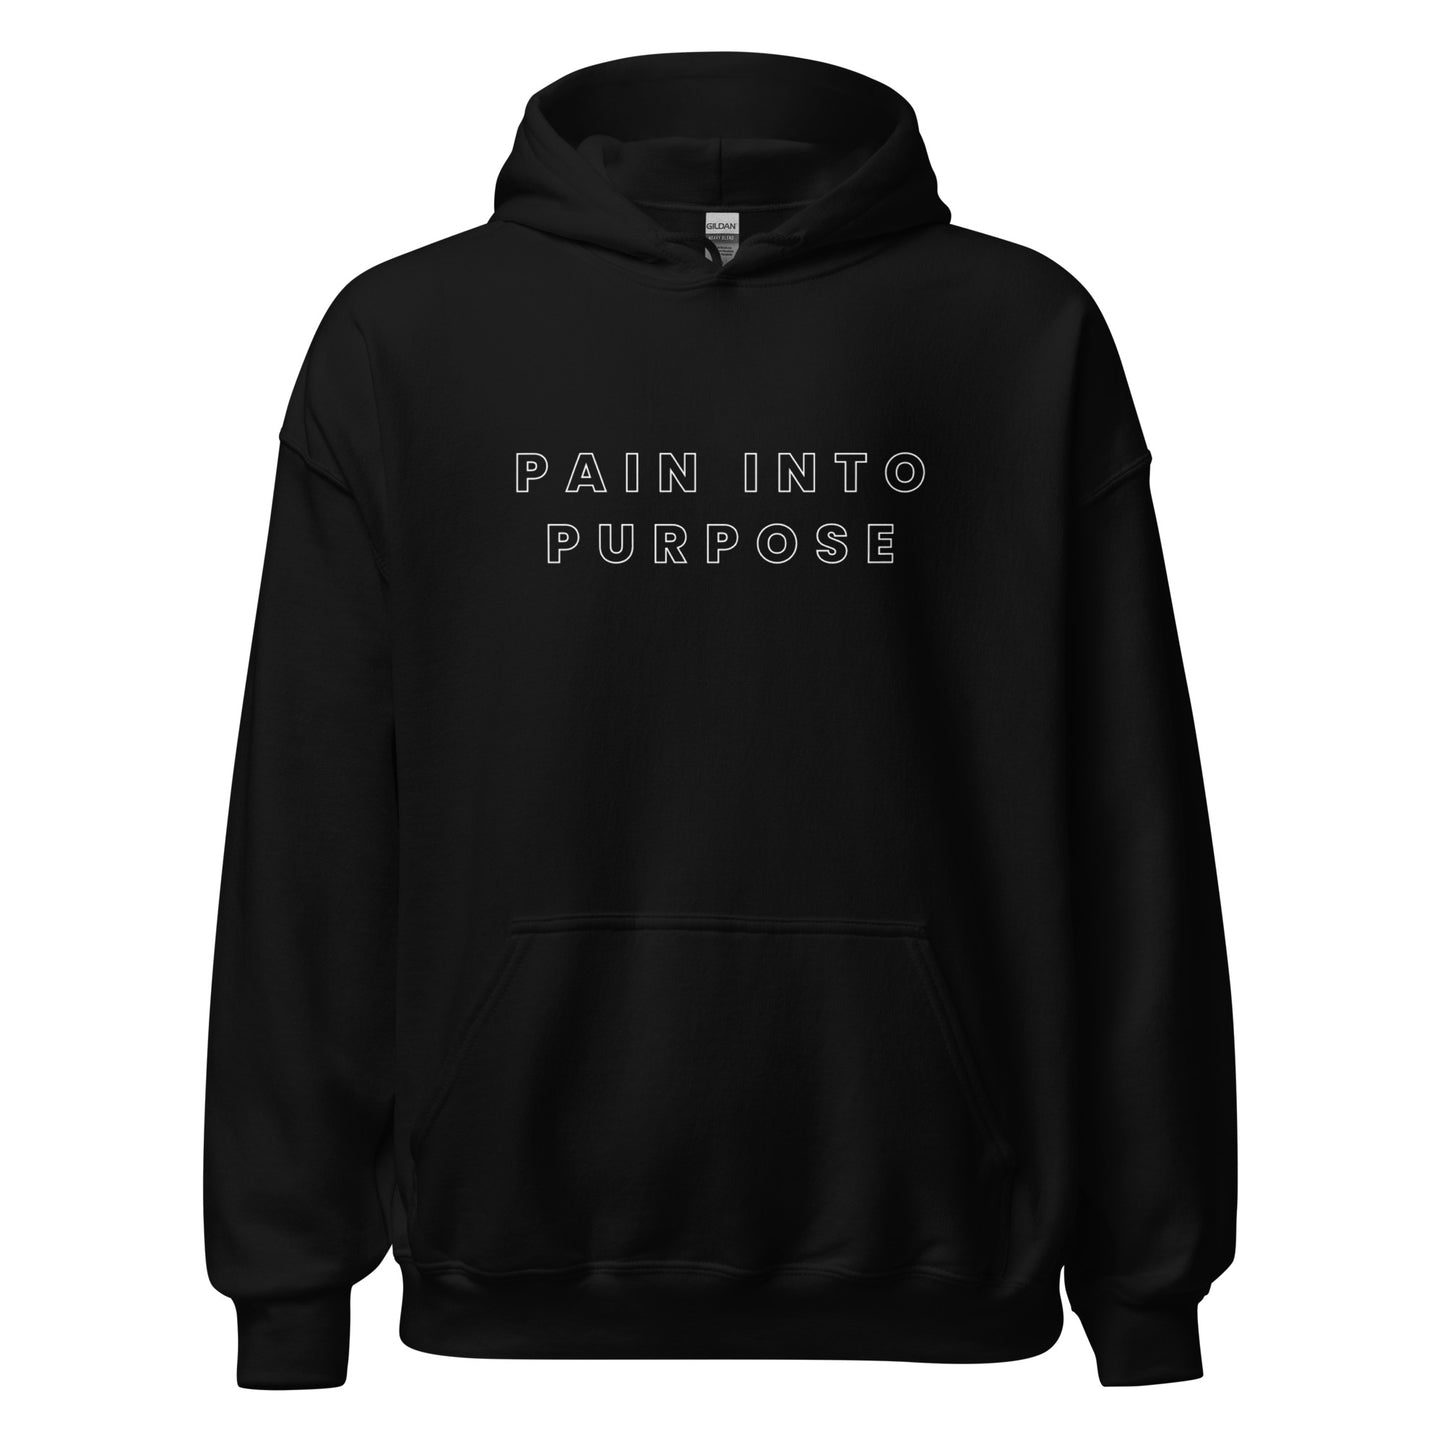 SESSION 4: Pain Into Purpose Hoodie